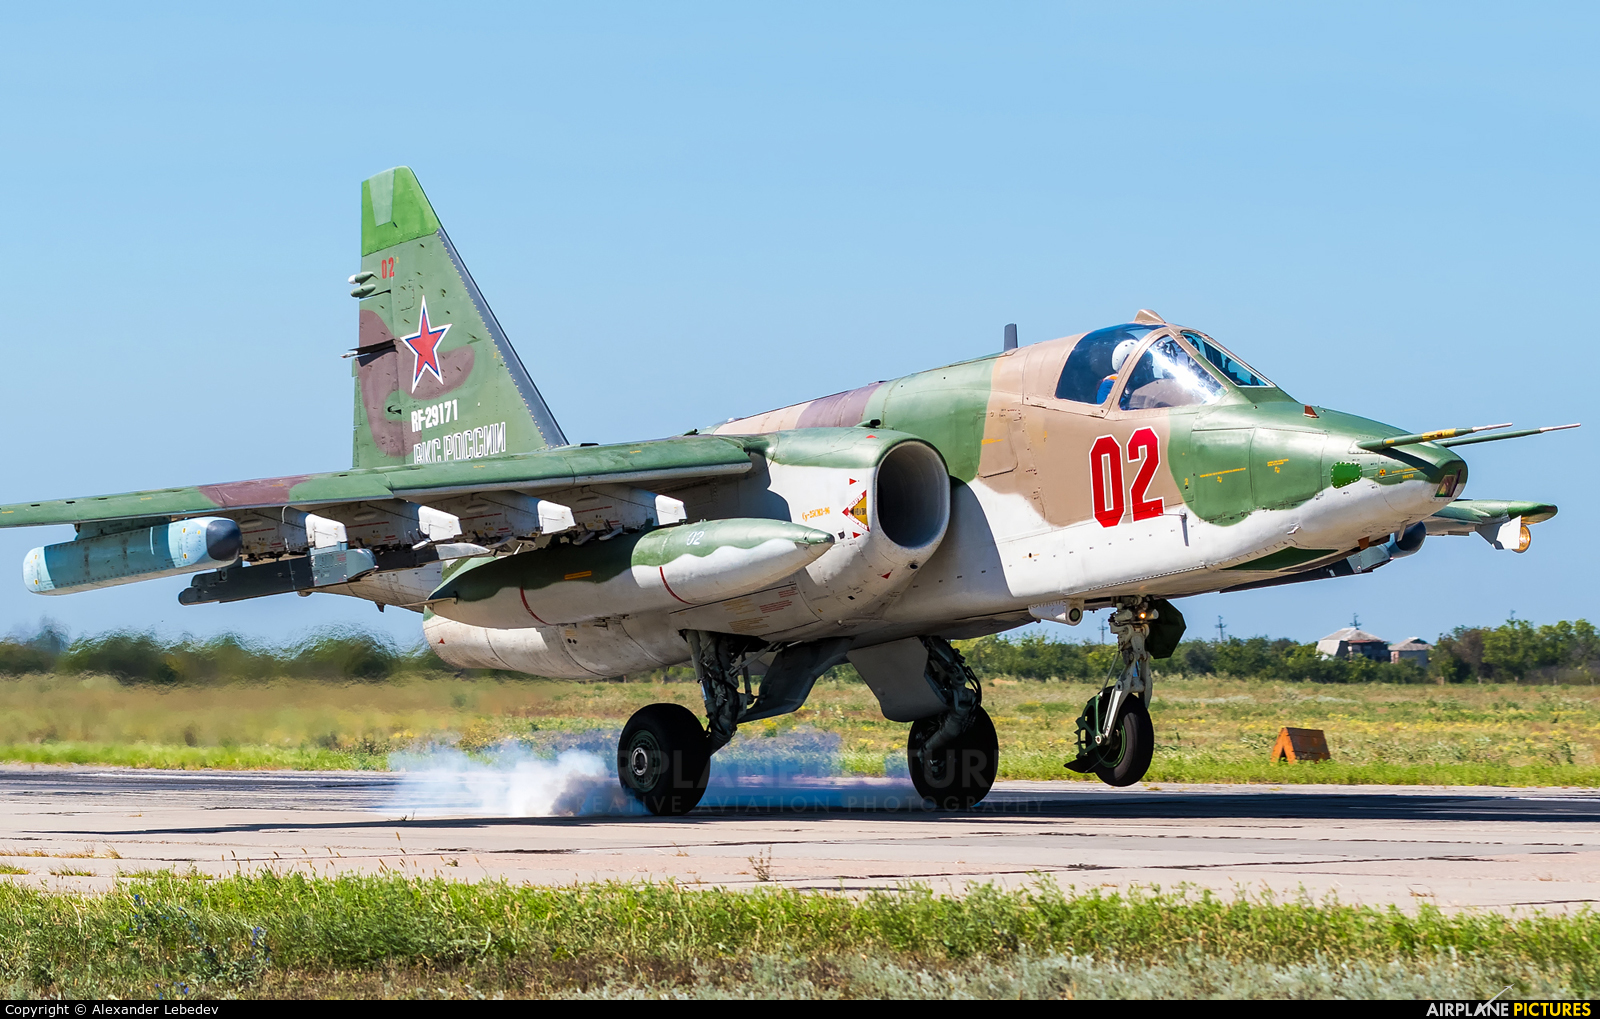 Russia - Air Force 02 aircraft at Undisclosed Location